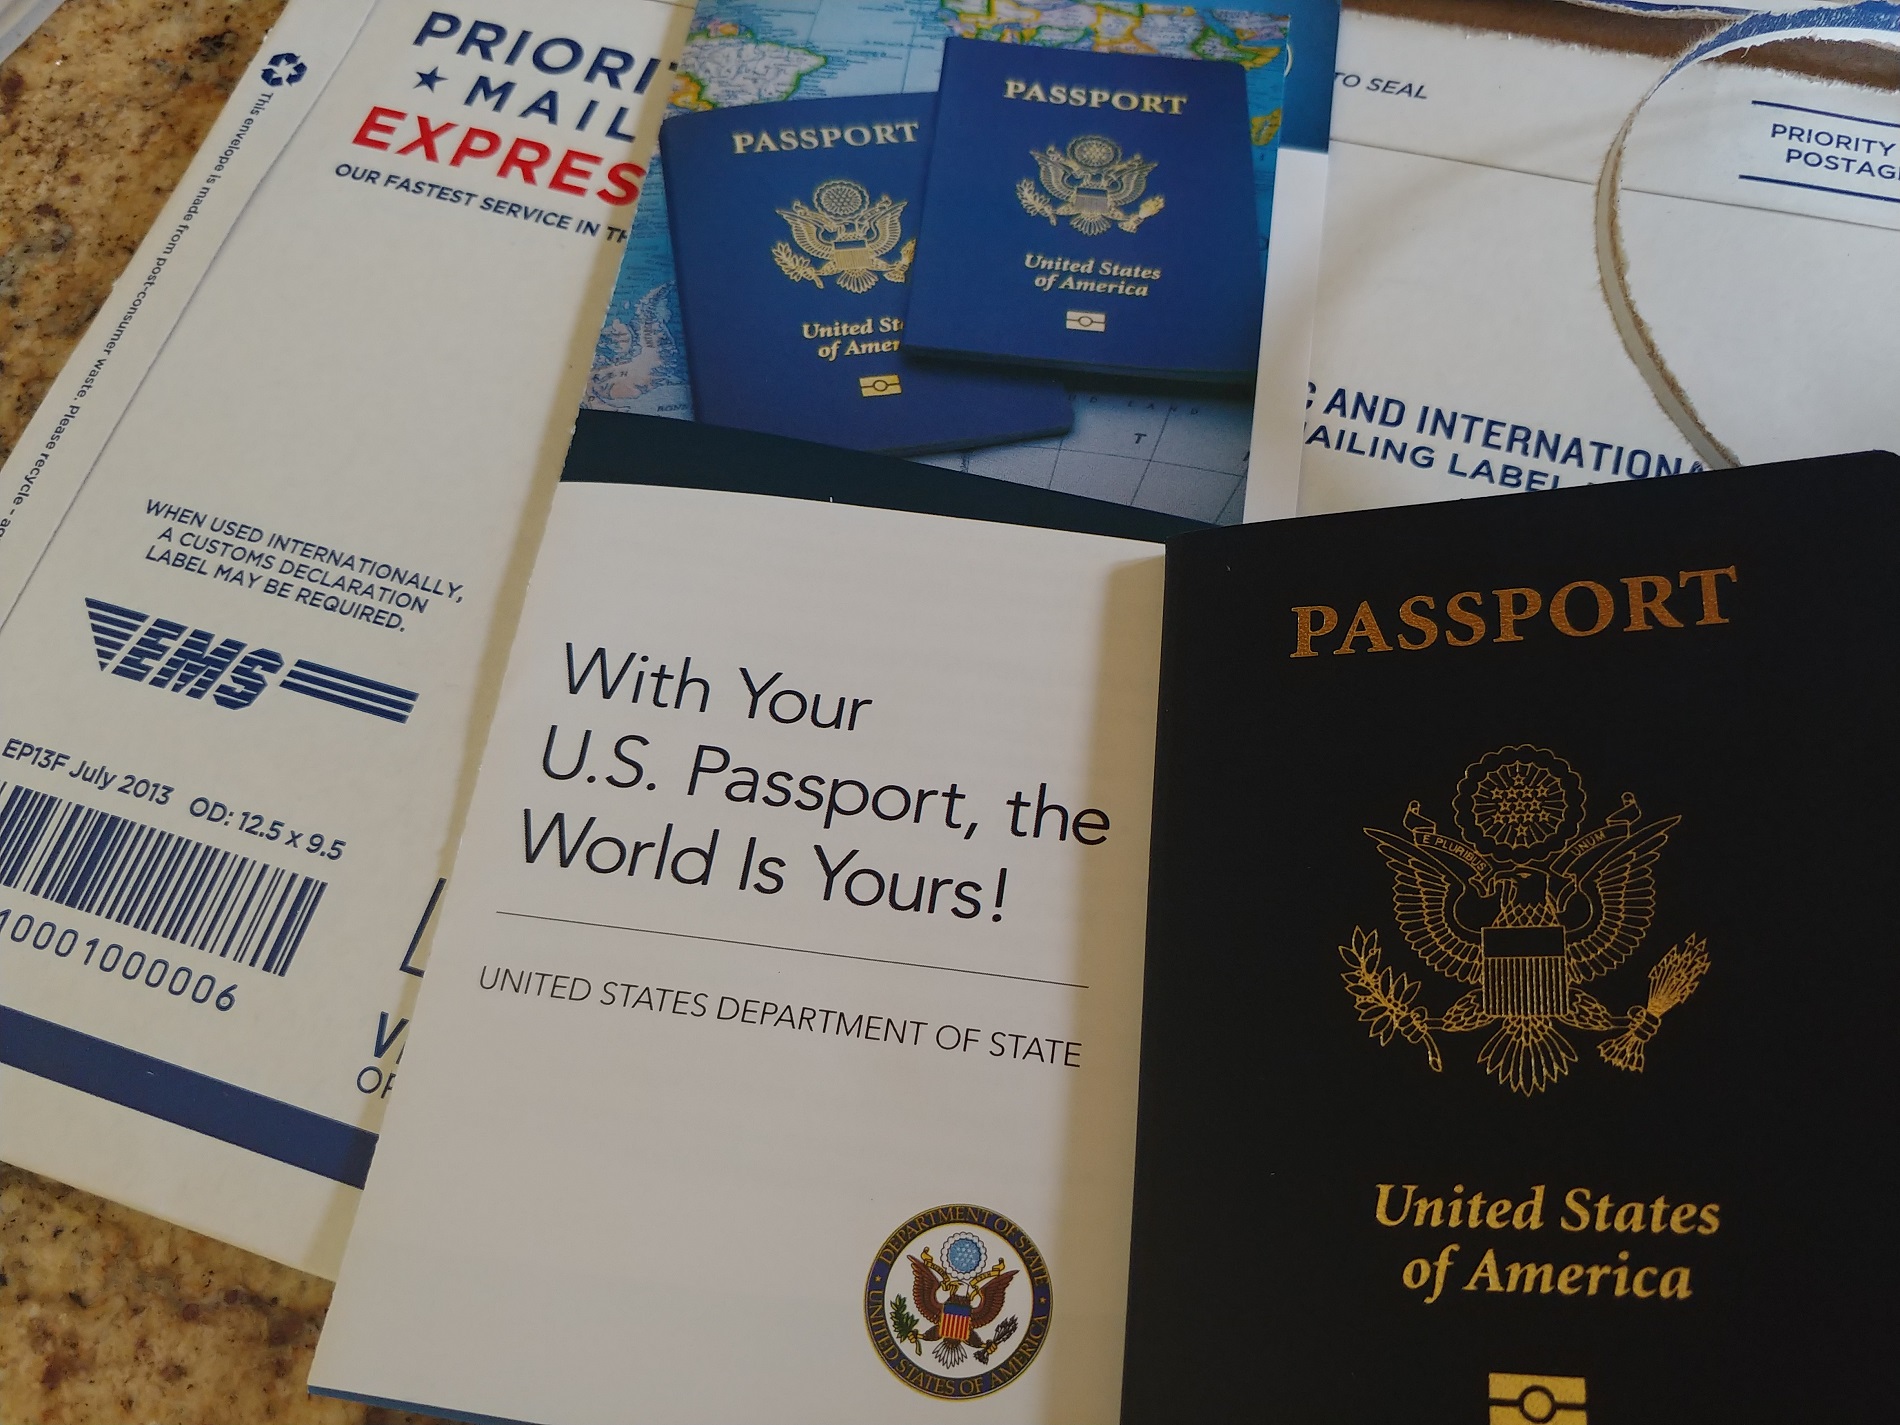 getting an expedited passport